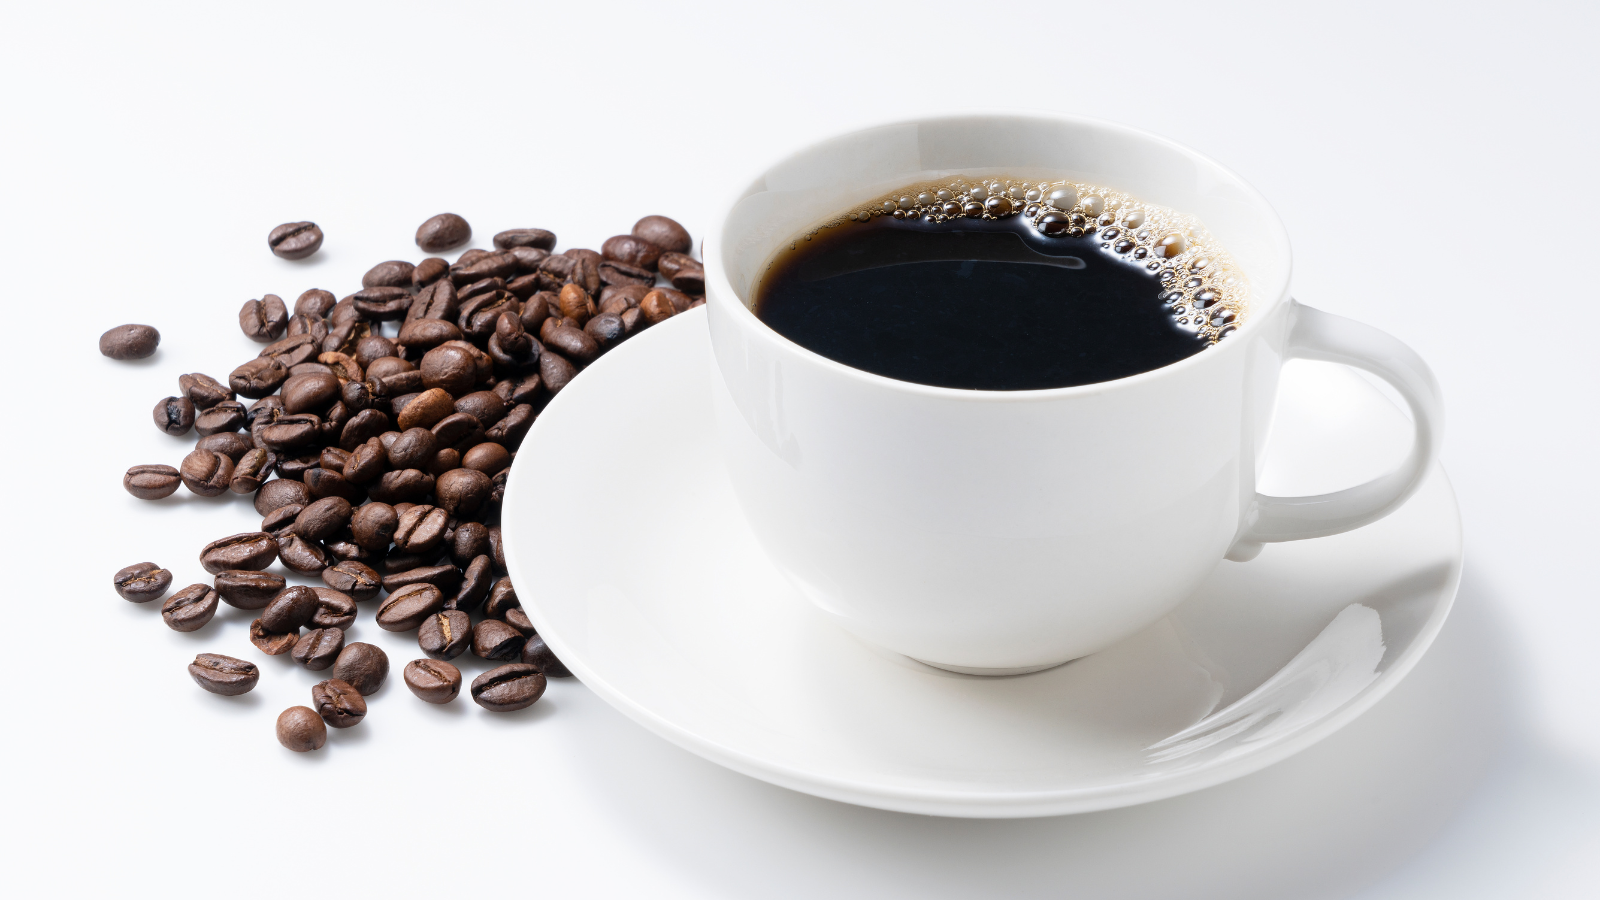 What is the role of coffee in autophagy?